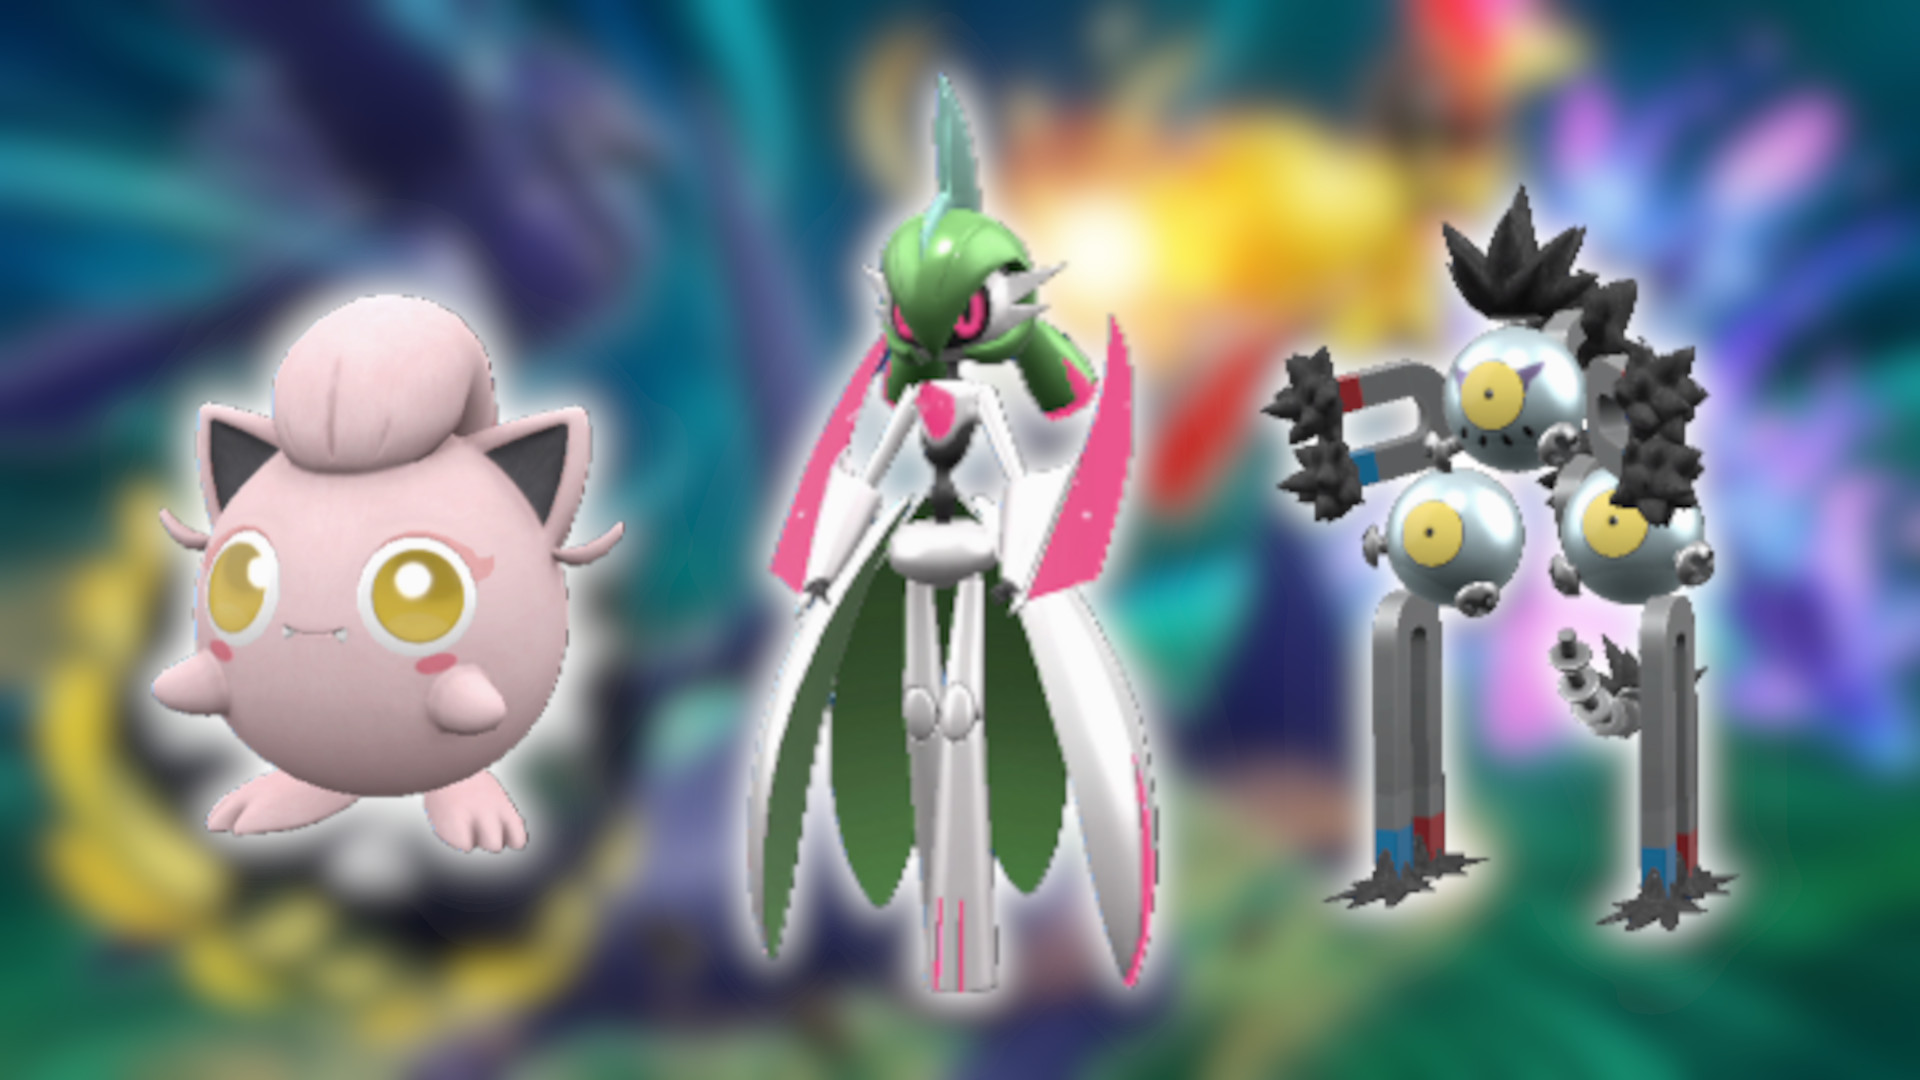 Paradox Pokémon are coming to Scarlet & Violet competitive